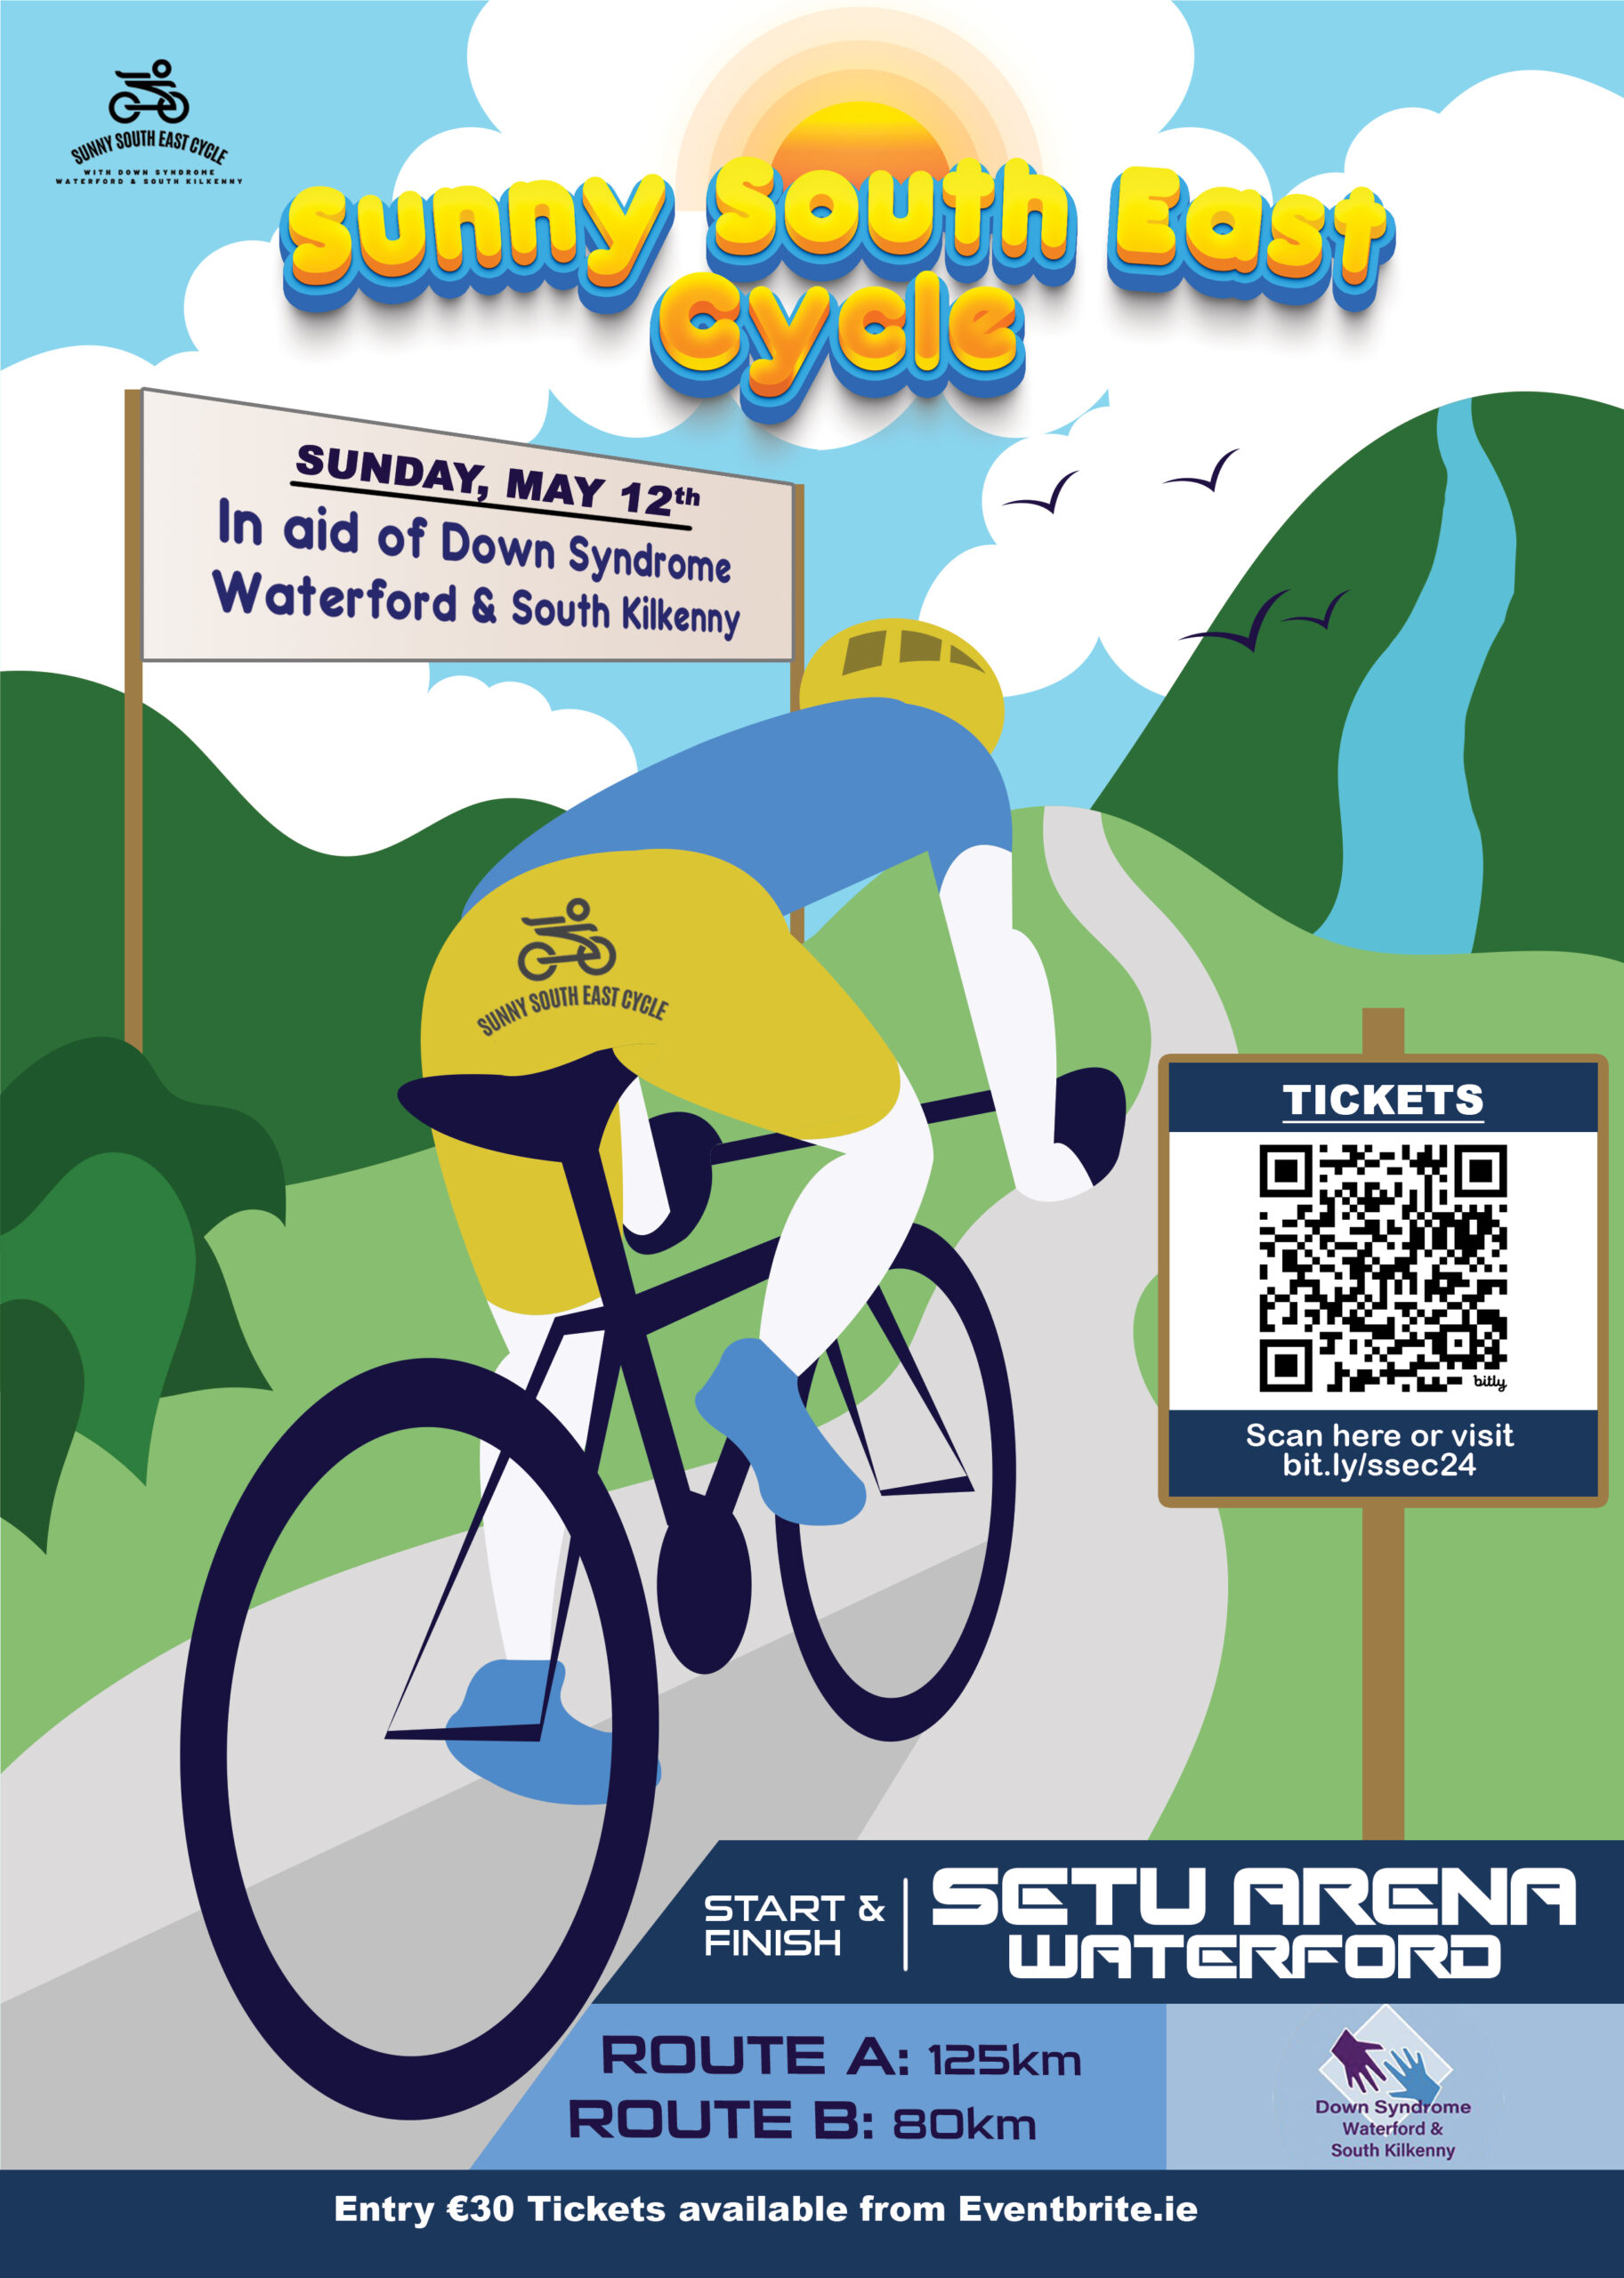 Poster for Sunny South East Cycle event featuring a person riding a bicycle through scenic landscapes.